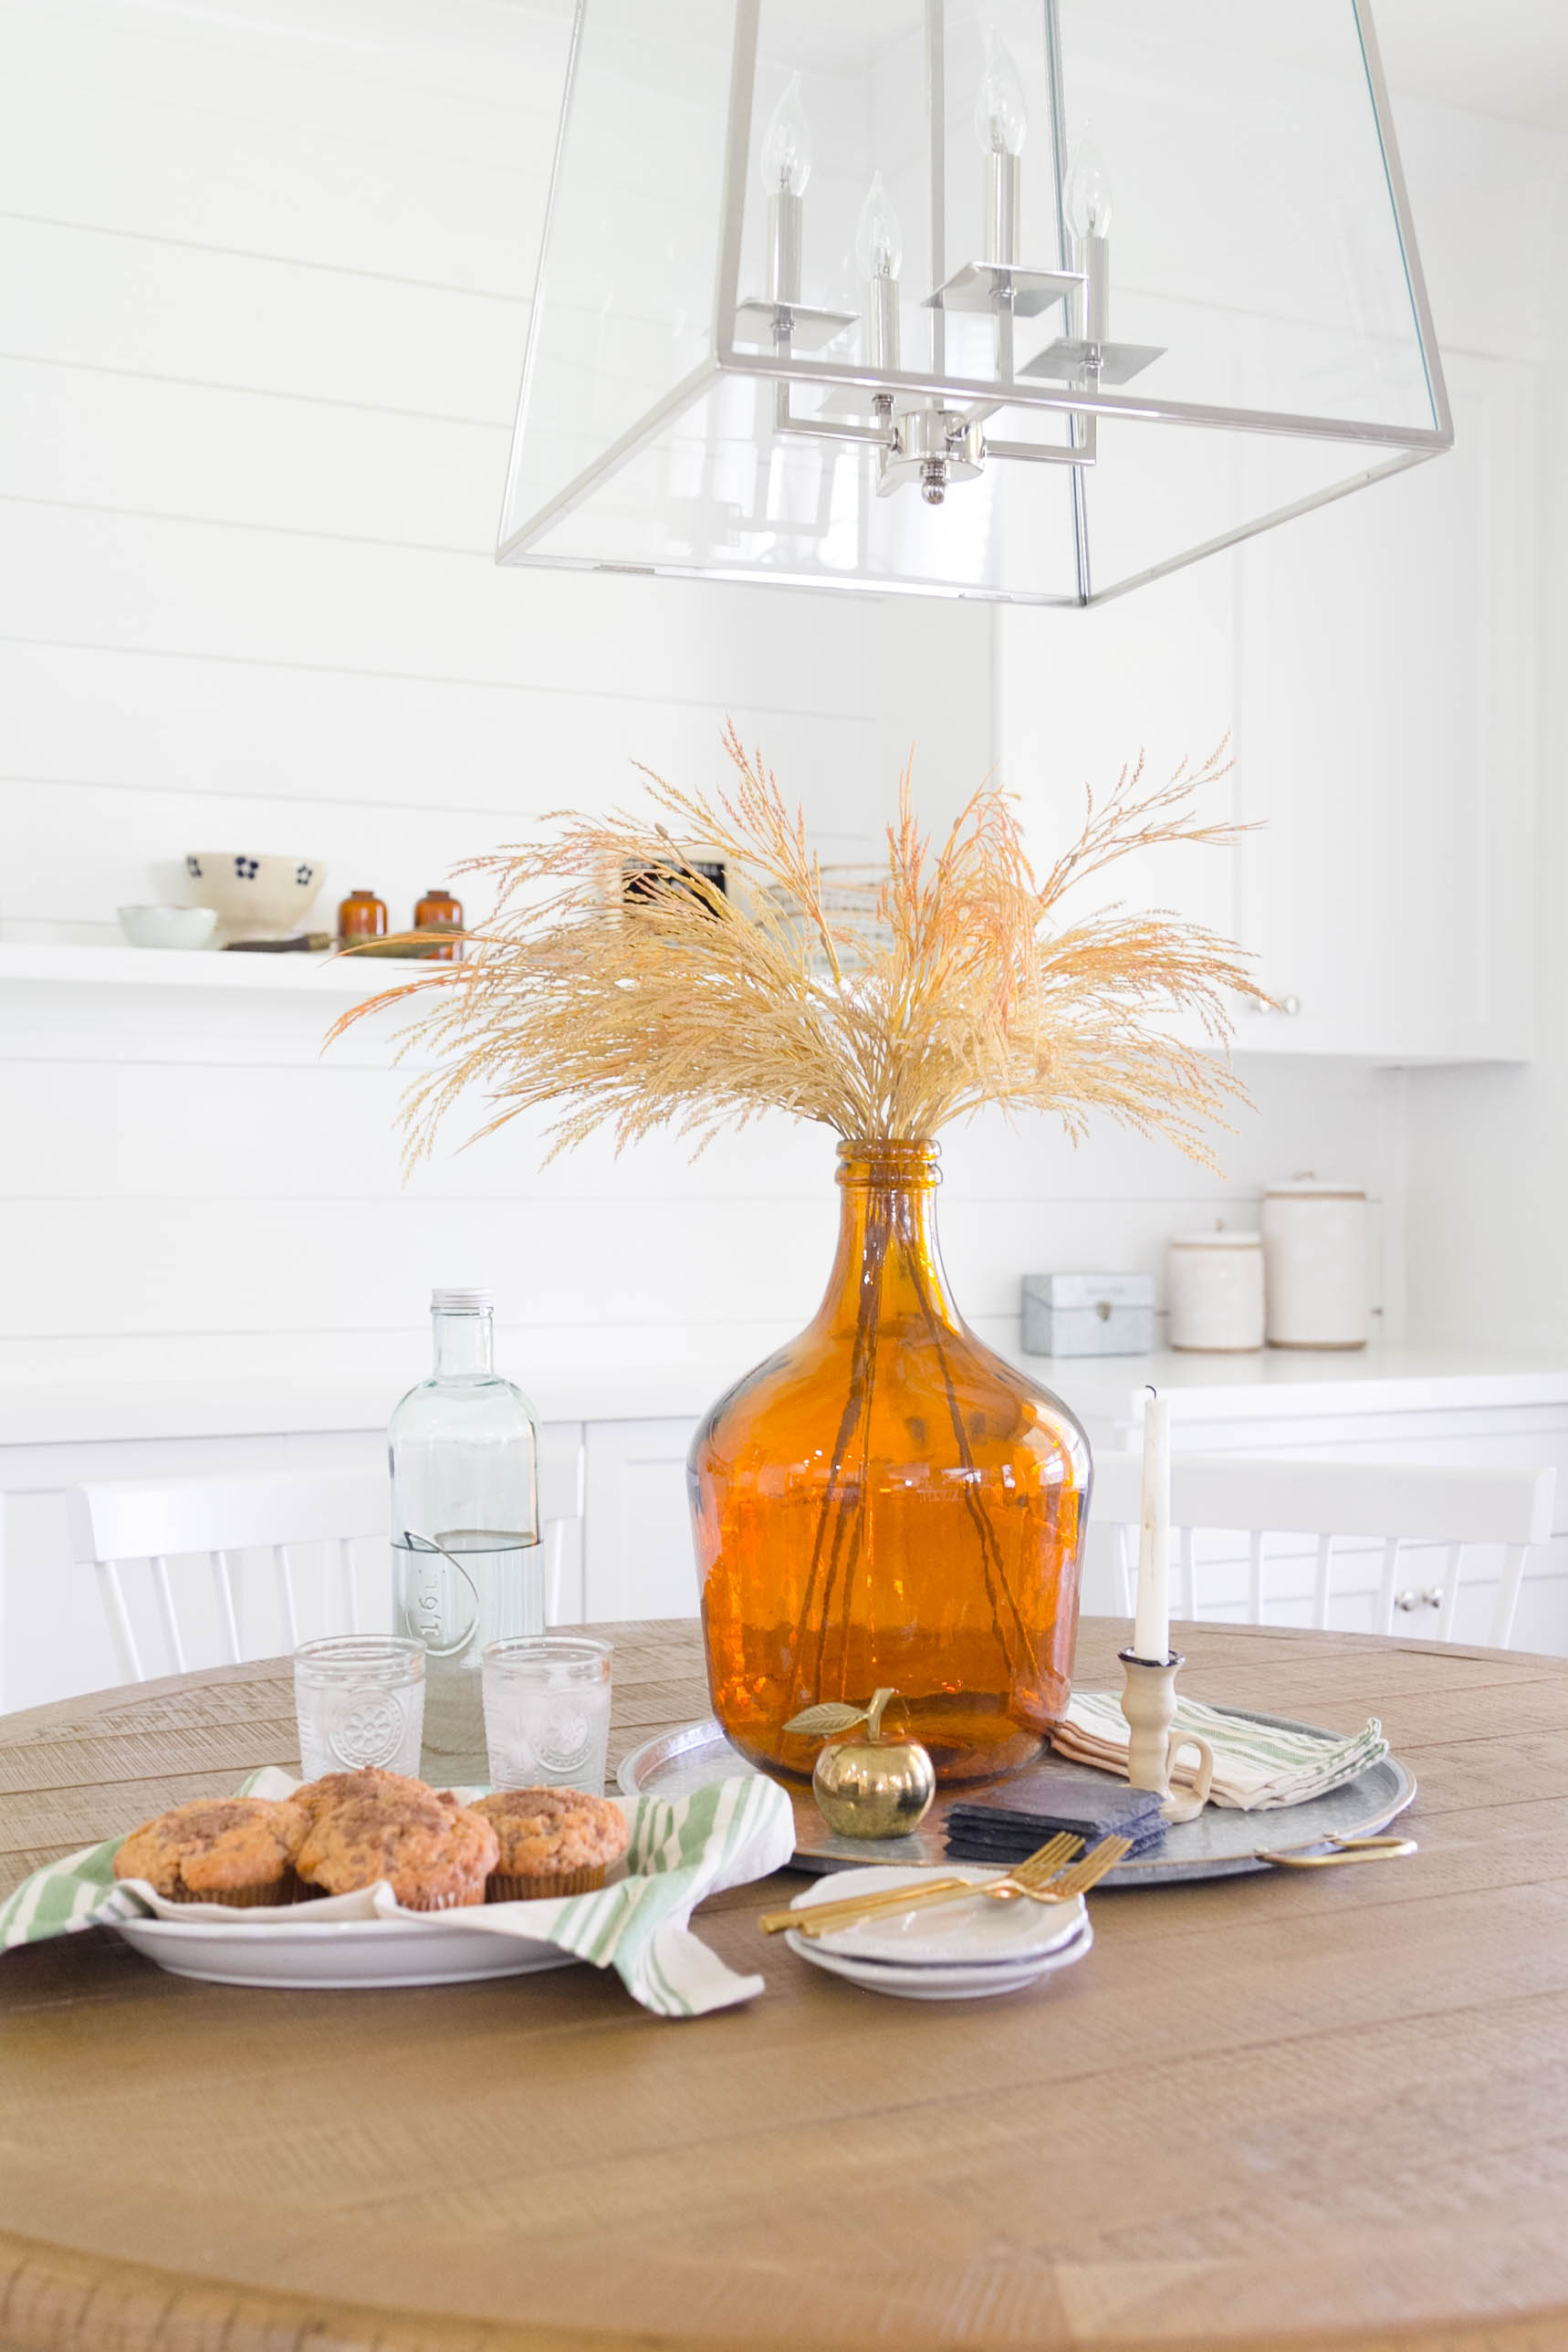 Simple Fall Dining Room Decorating-Vintage Decor/Amber Bottle